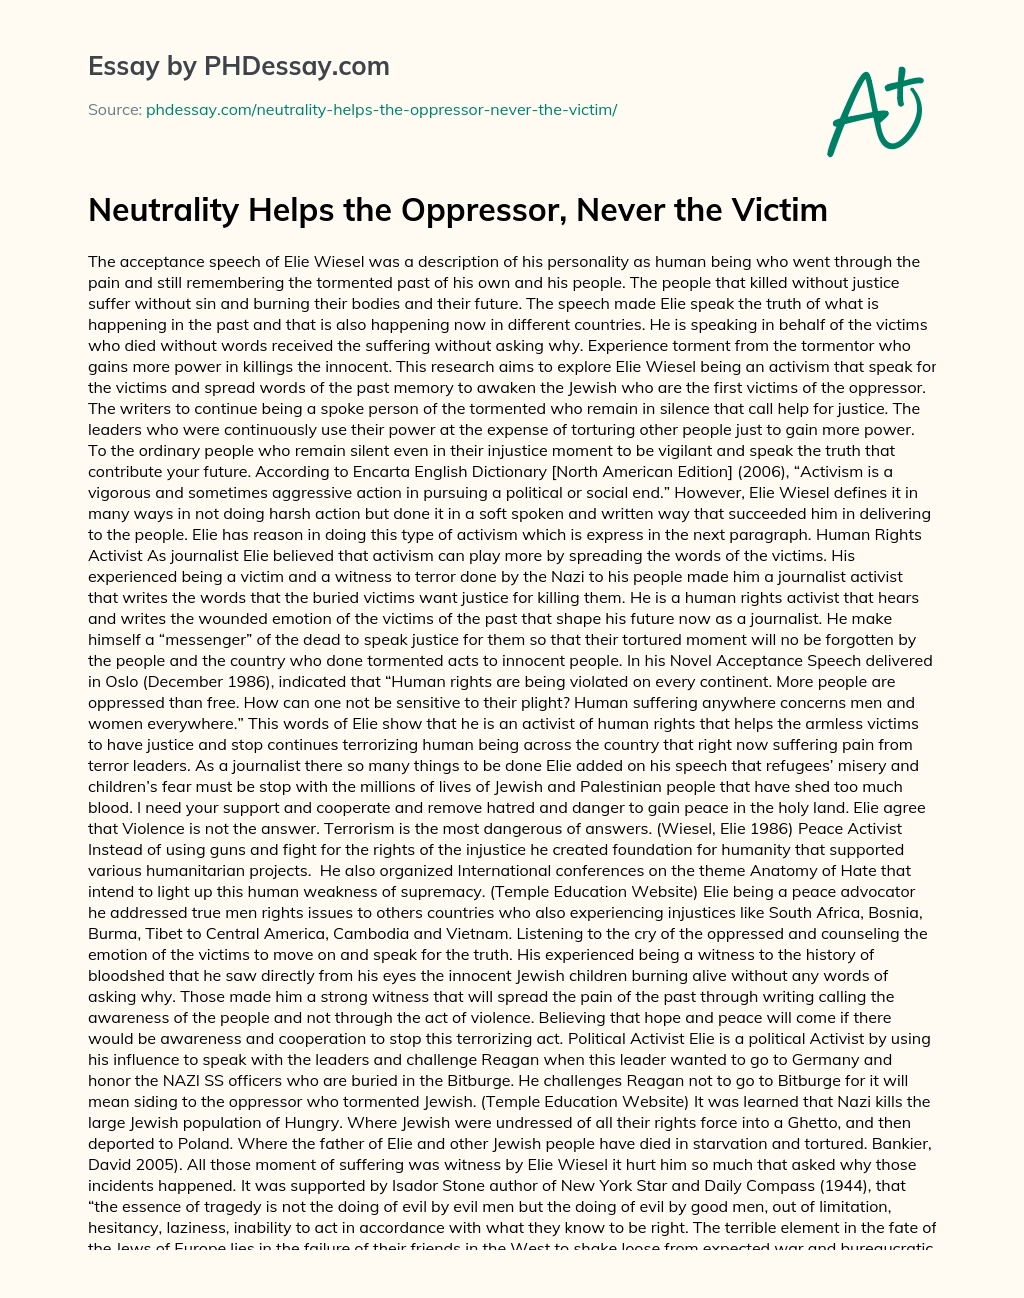 Neutrality Helps the Oppressor, Never the Victim essay